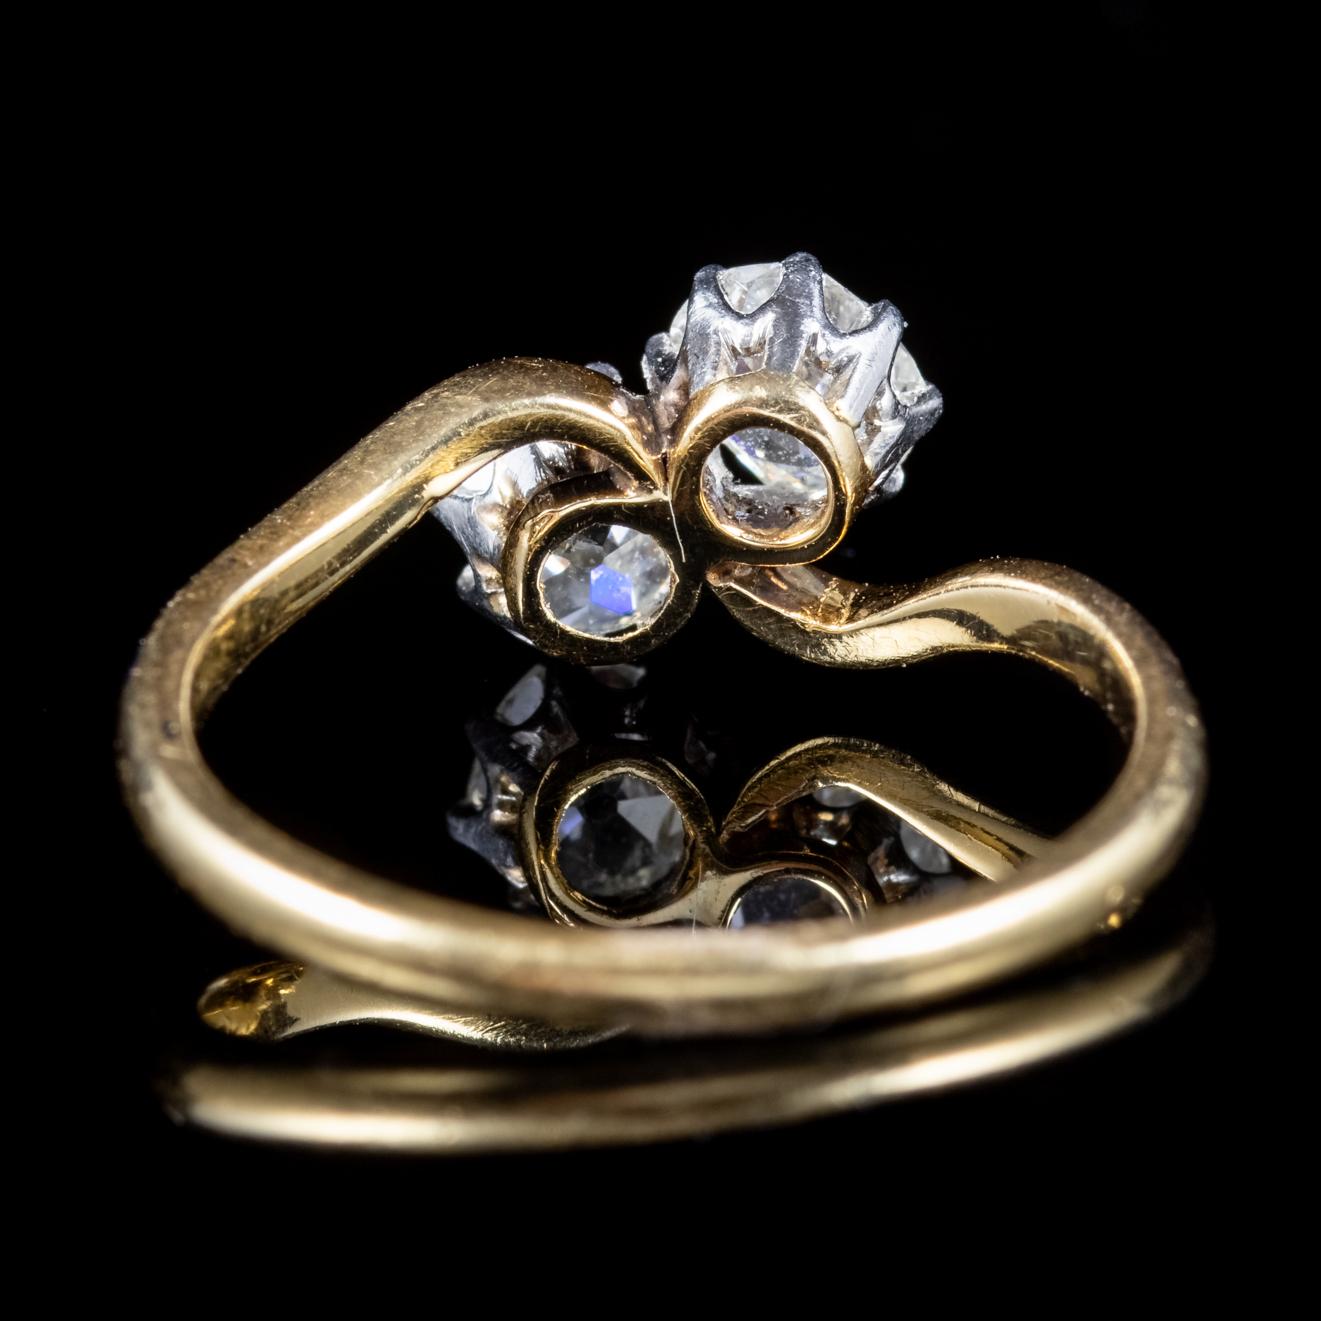 Antique Edwardian Old Cut Diamond Twist Ring 18 Carat Gold, circa 1910 In Good Condition For Sale In Lancaster, Lancashire